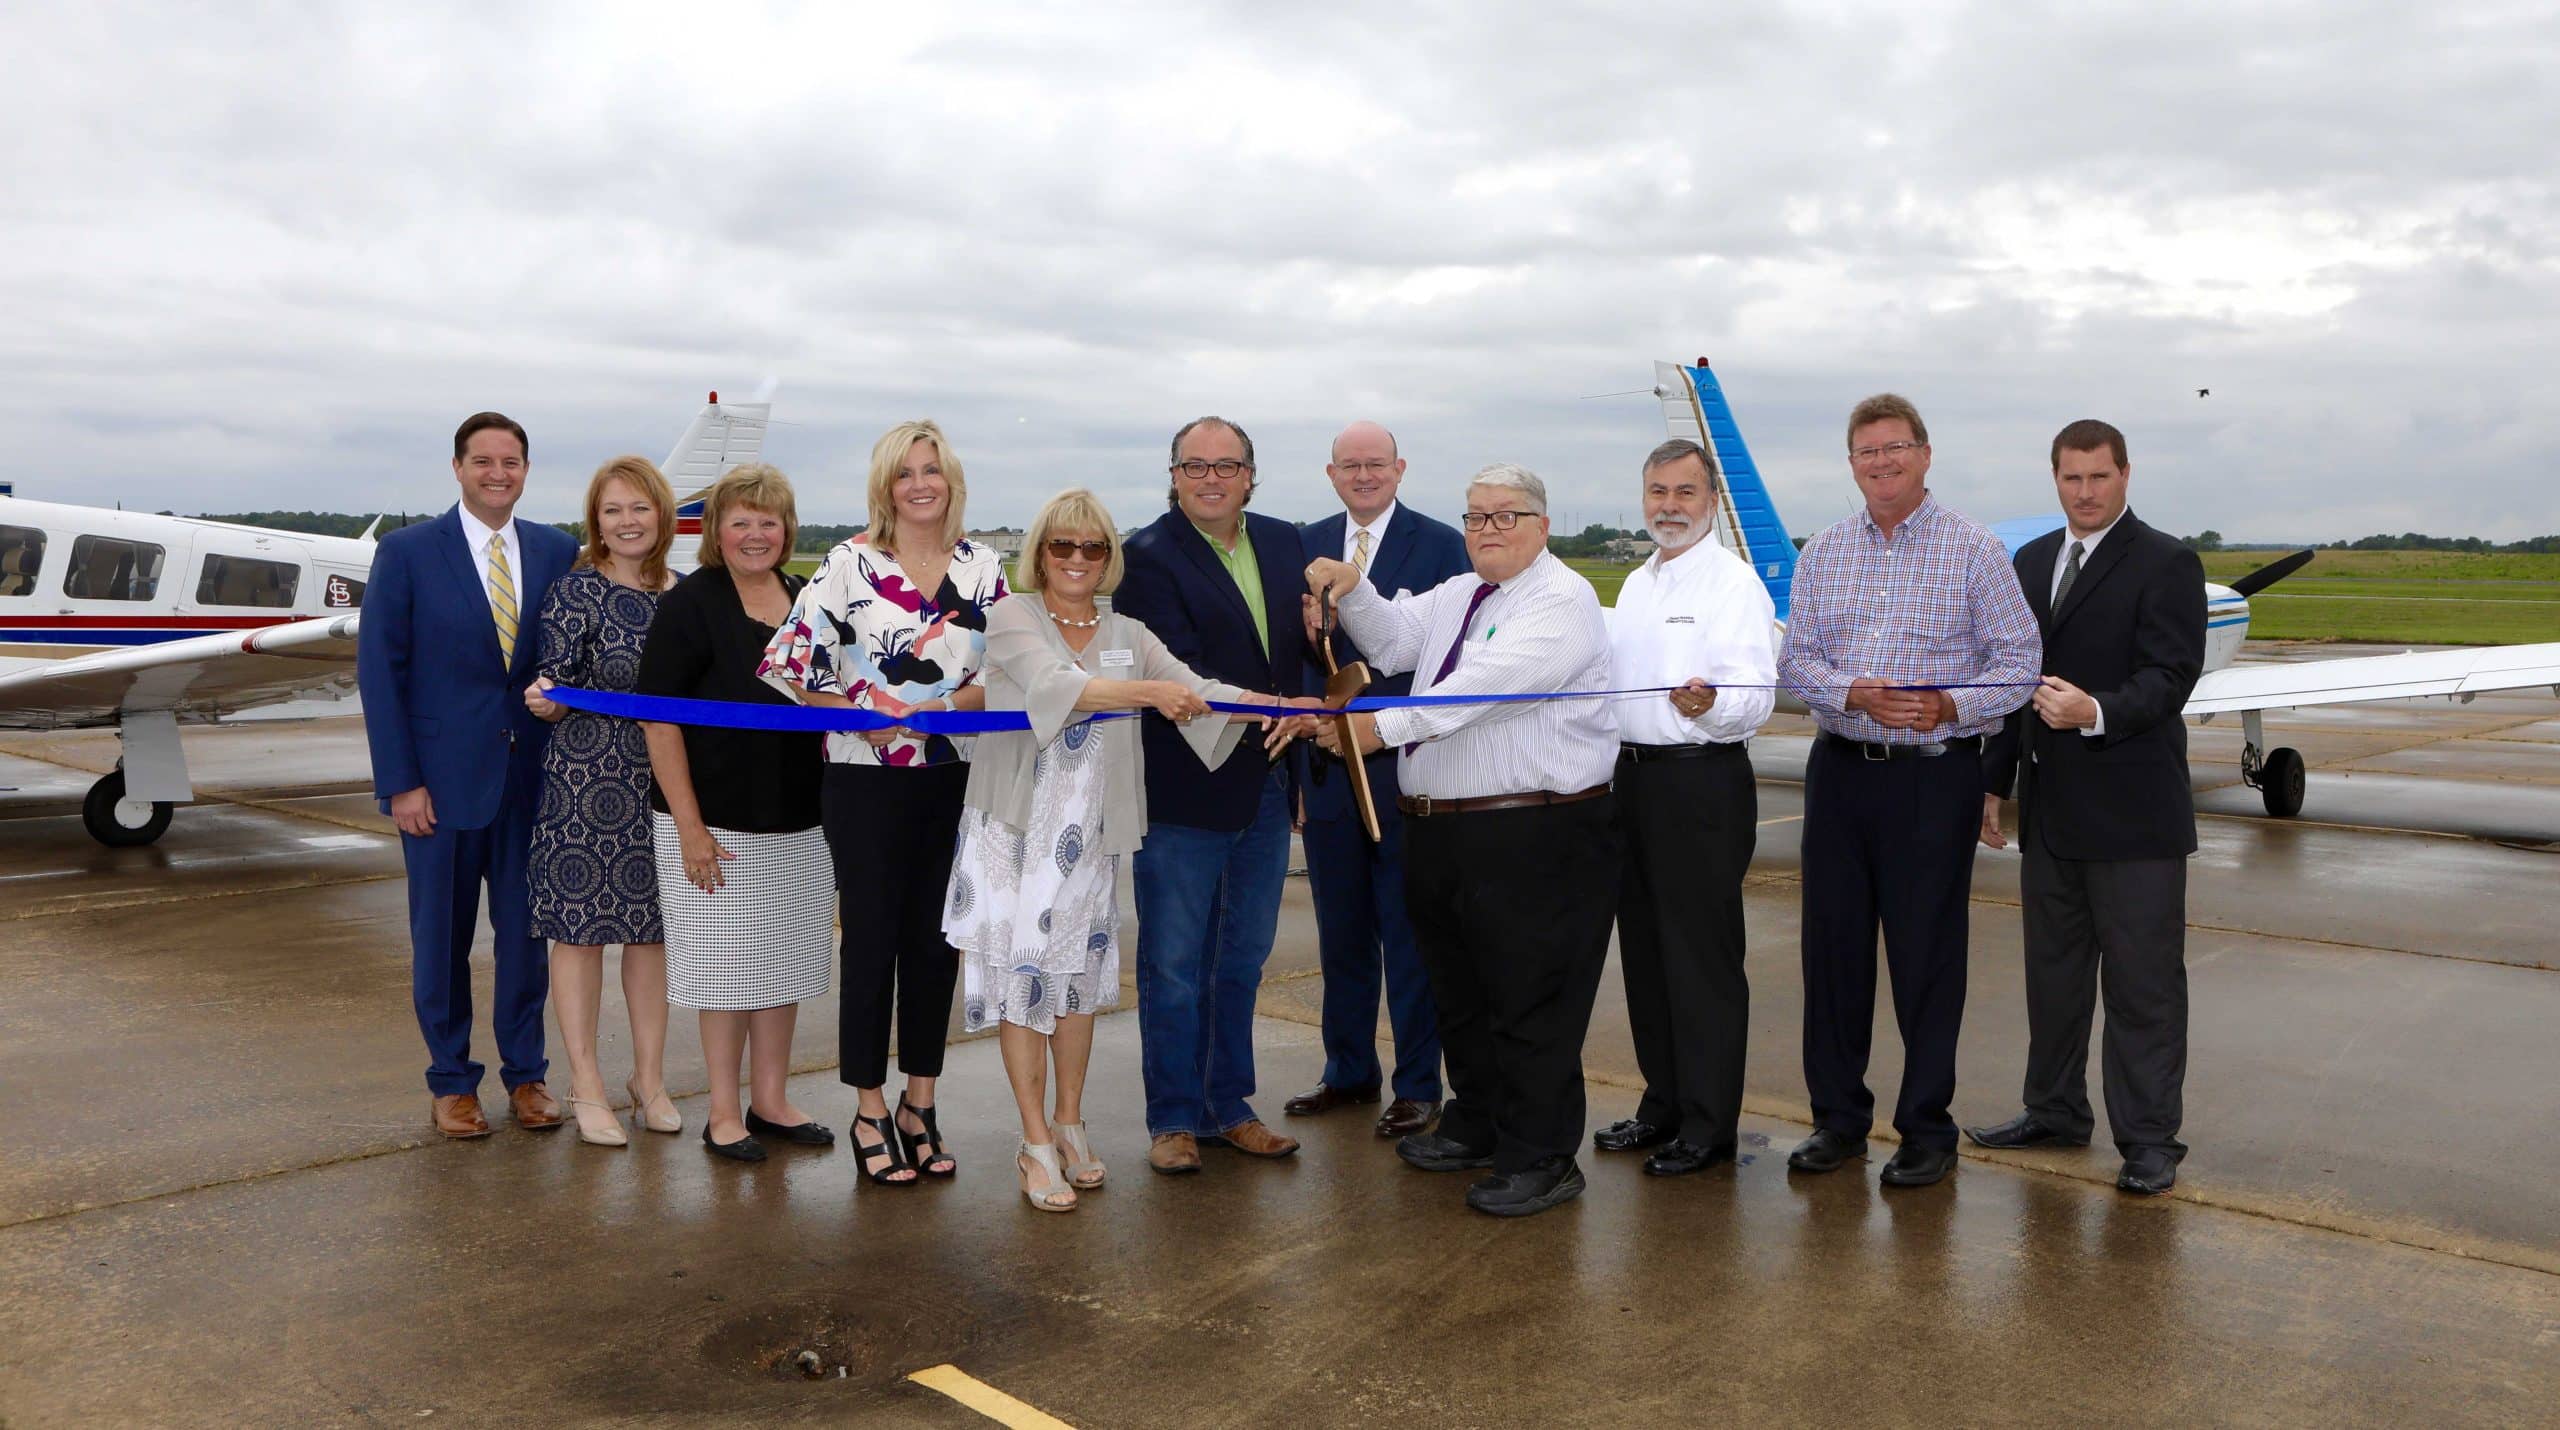 OTC officials and industry and community partners cut the ribbon at the new Aviation Center in Lebanon